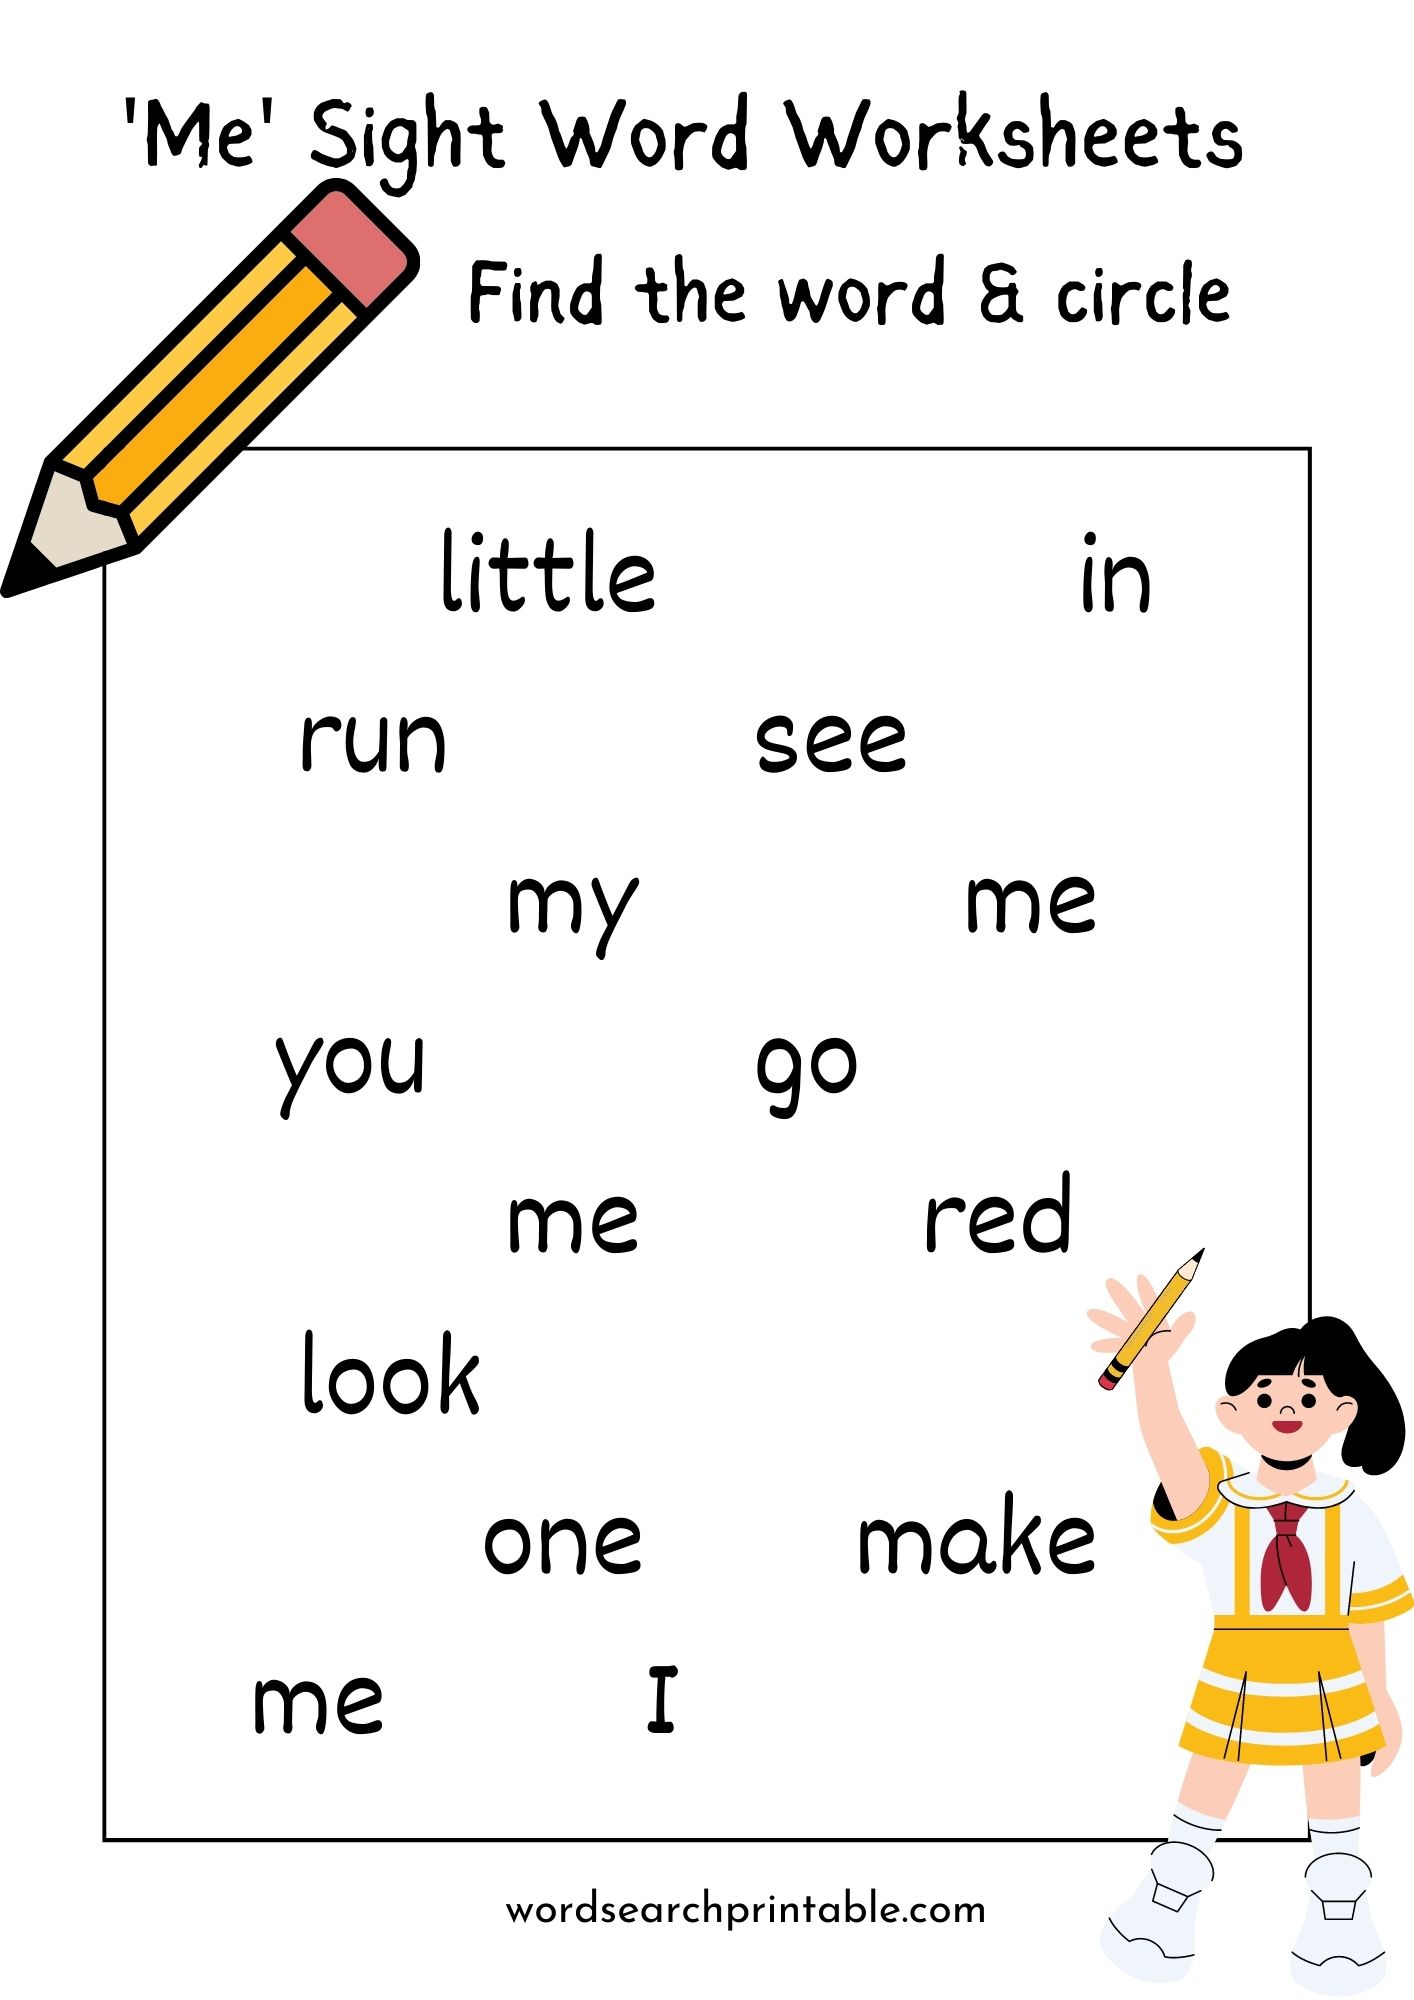 Find the sight word Me and circle it